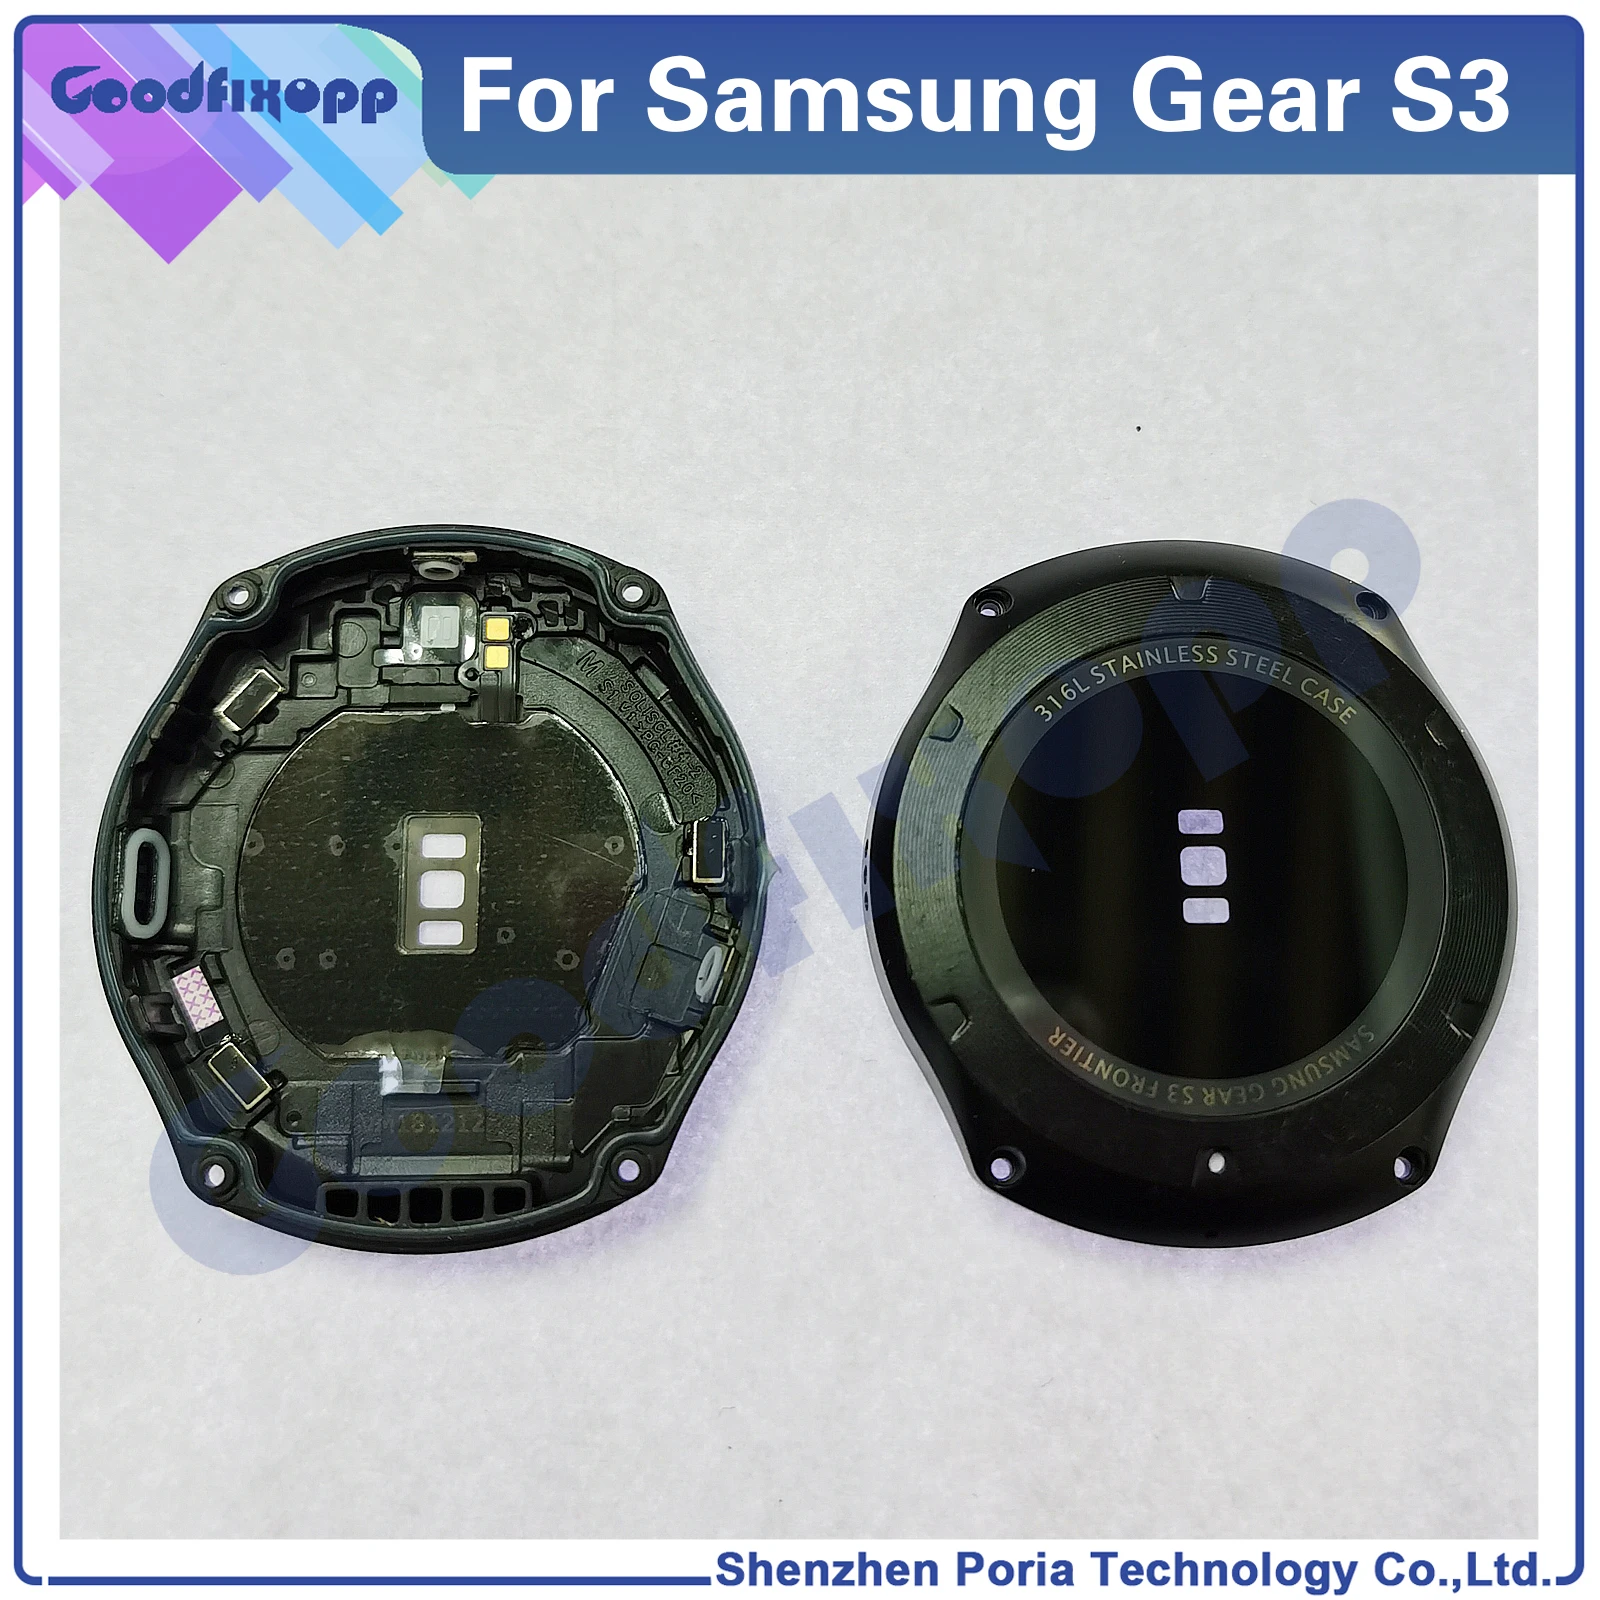 Original For Samsung Gear S3 R760 R765 R770 R775 Watch Housing Shell Battery Cover Back Case Rear Cover Glass Lens